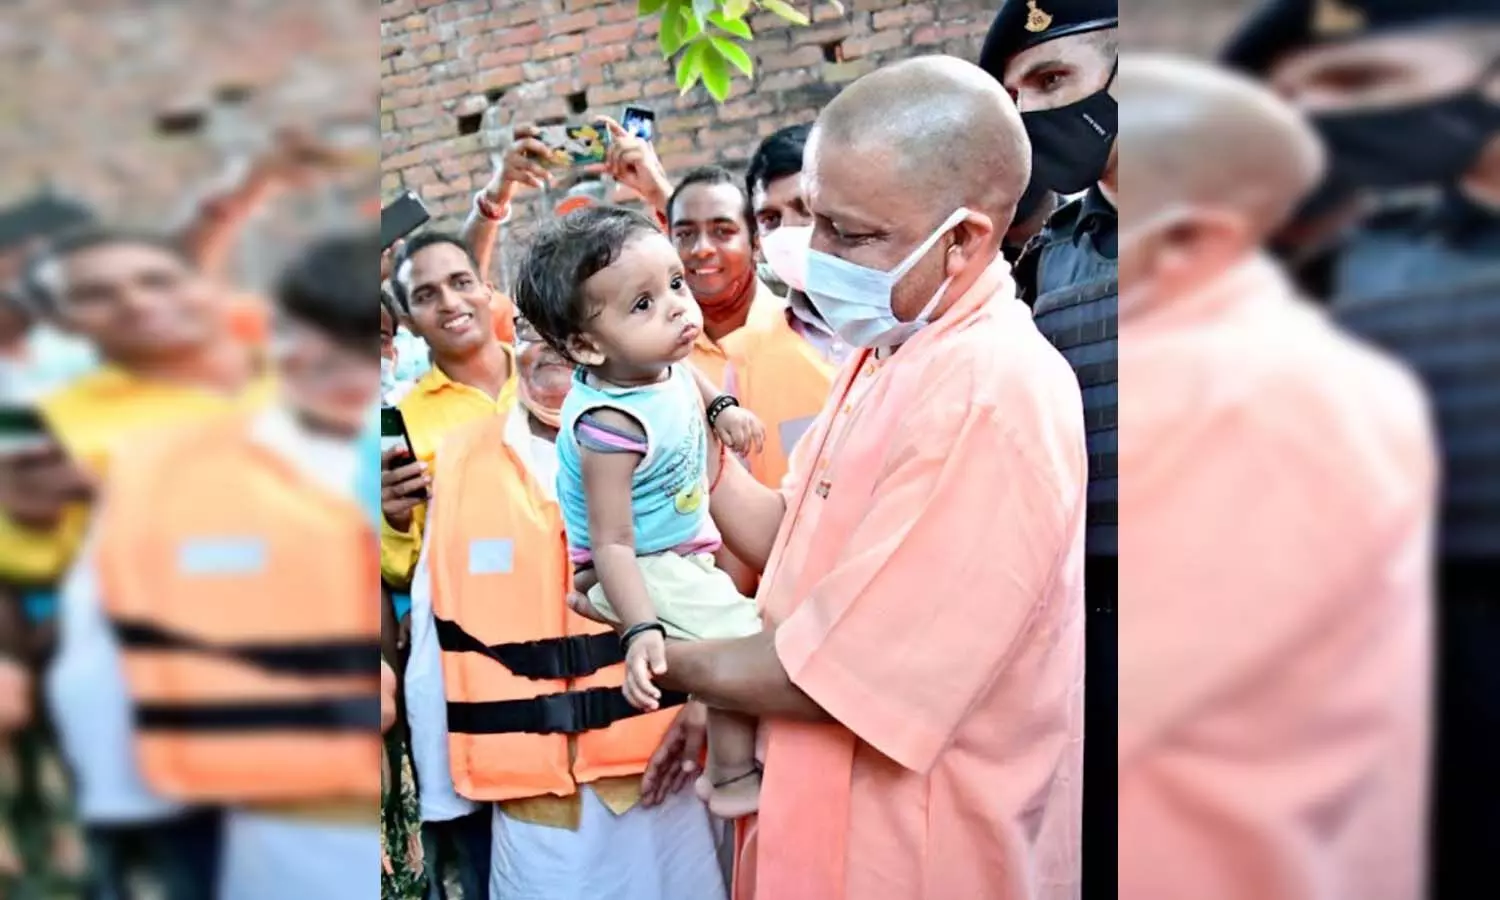 CM Yogi reached to know the condition of flood victims, caressing the child